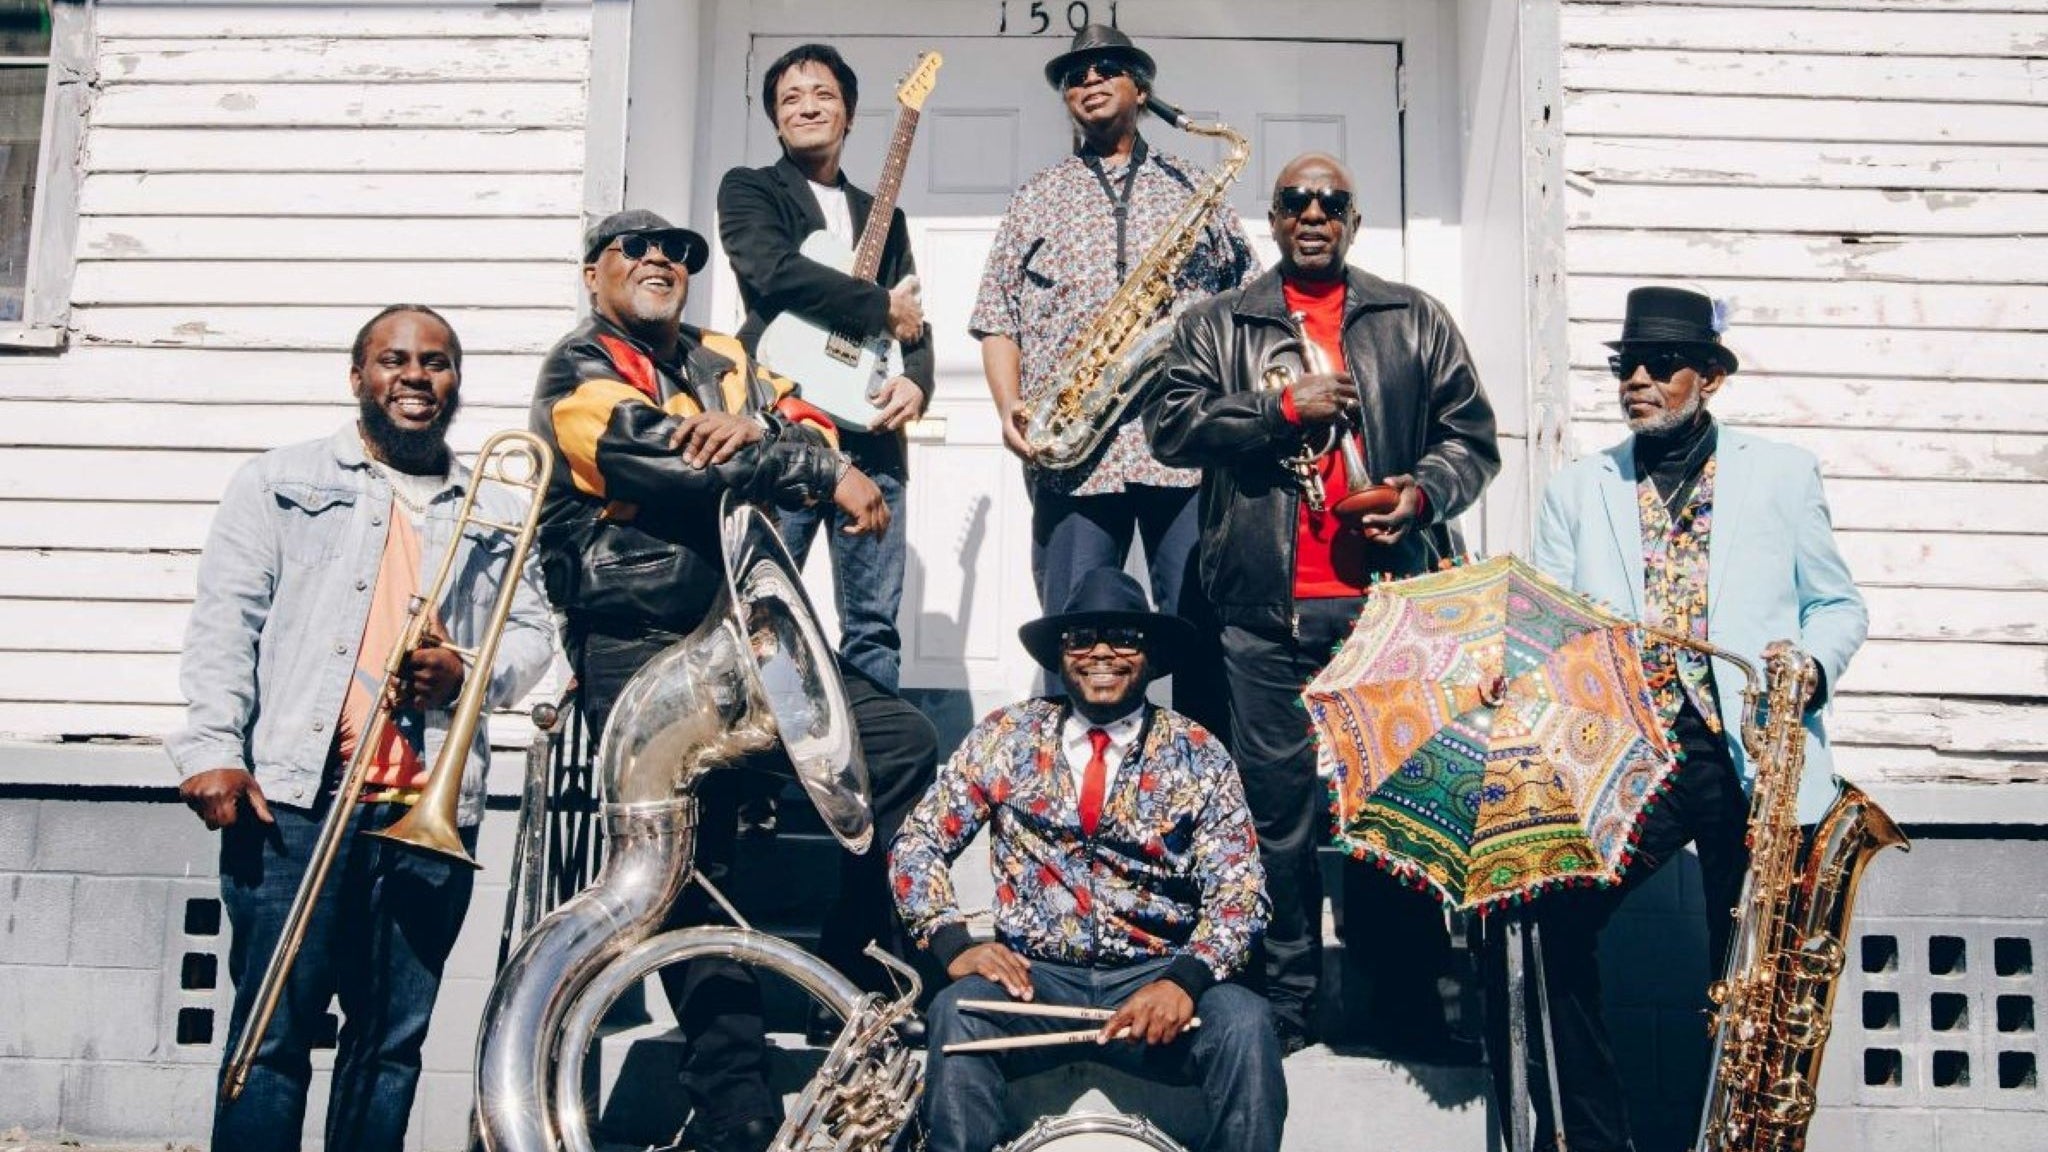 The Dirty Dozen Brass Band in Portsmouth promo photo for Patron Circle presale offer code